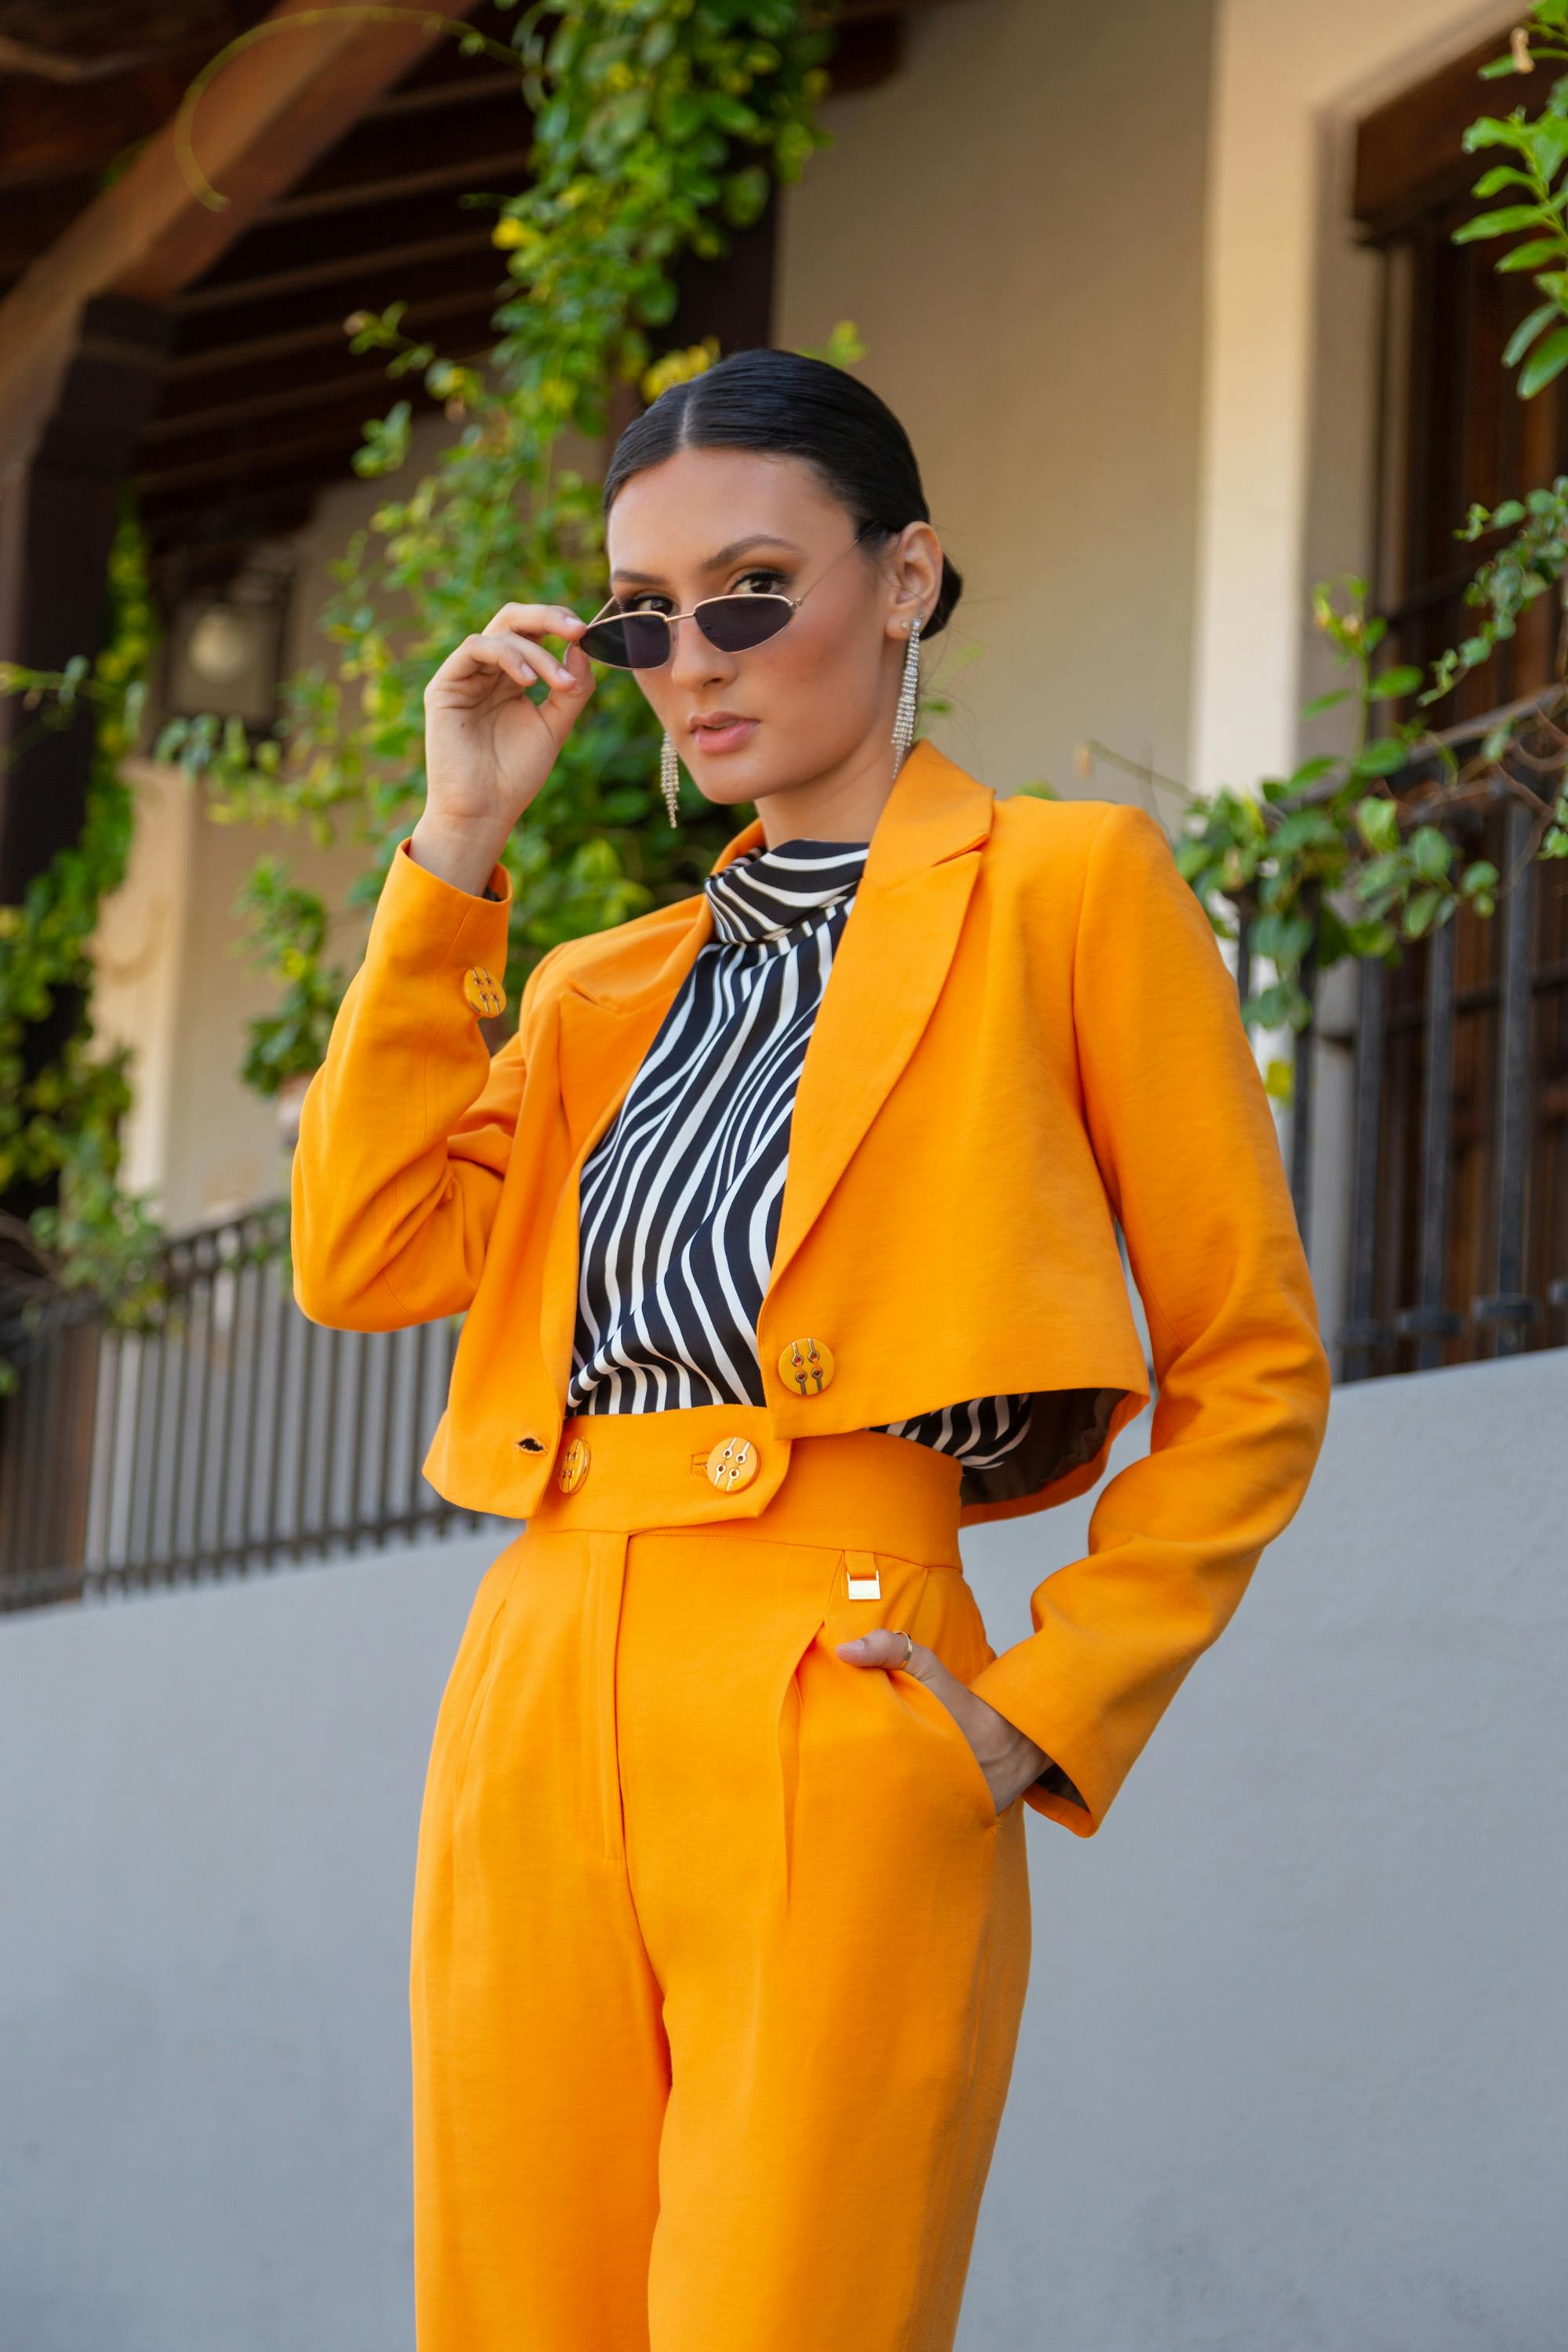 Top Clothing Tips Every Woman Can Use To Elevate Her Outfits